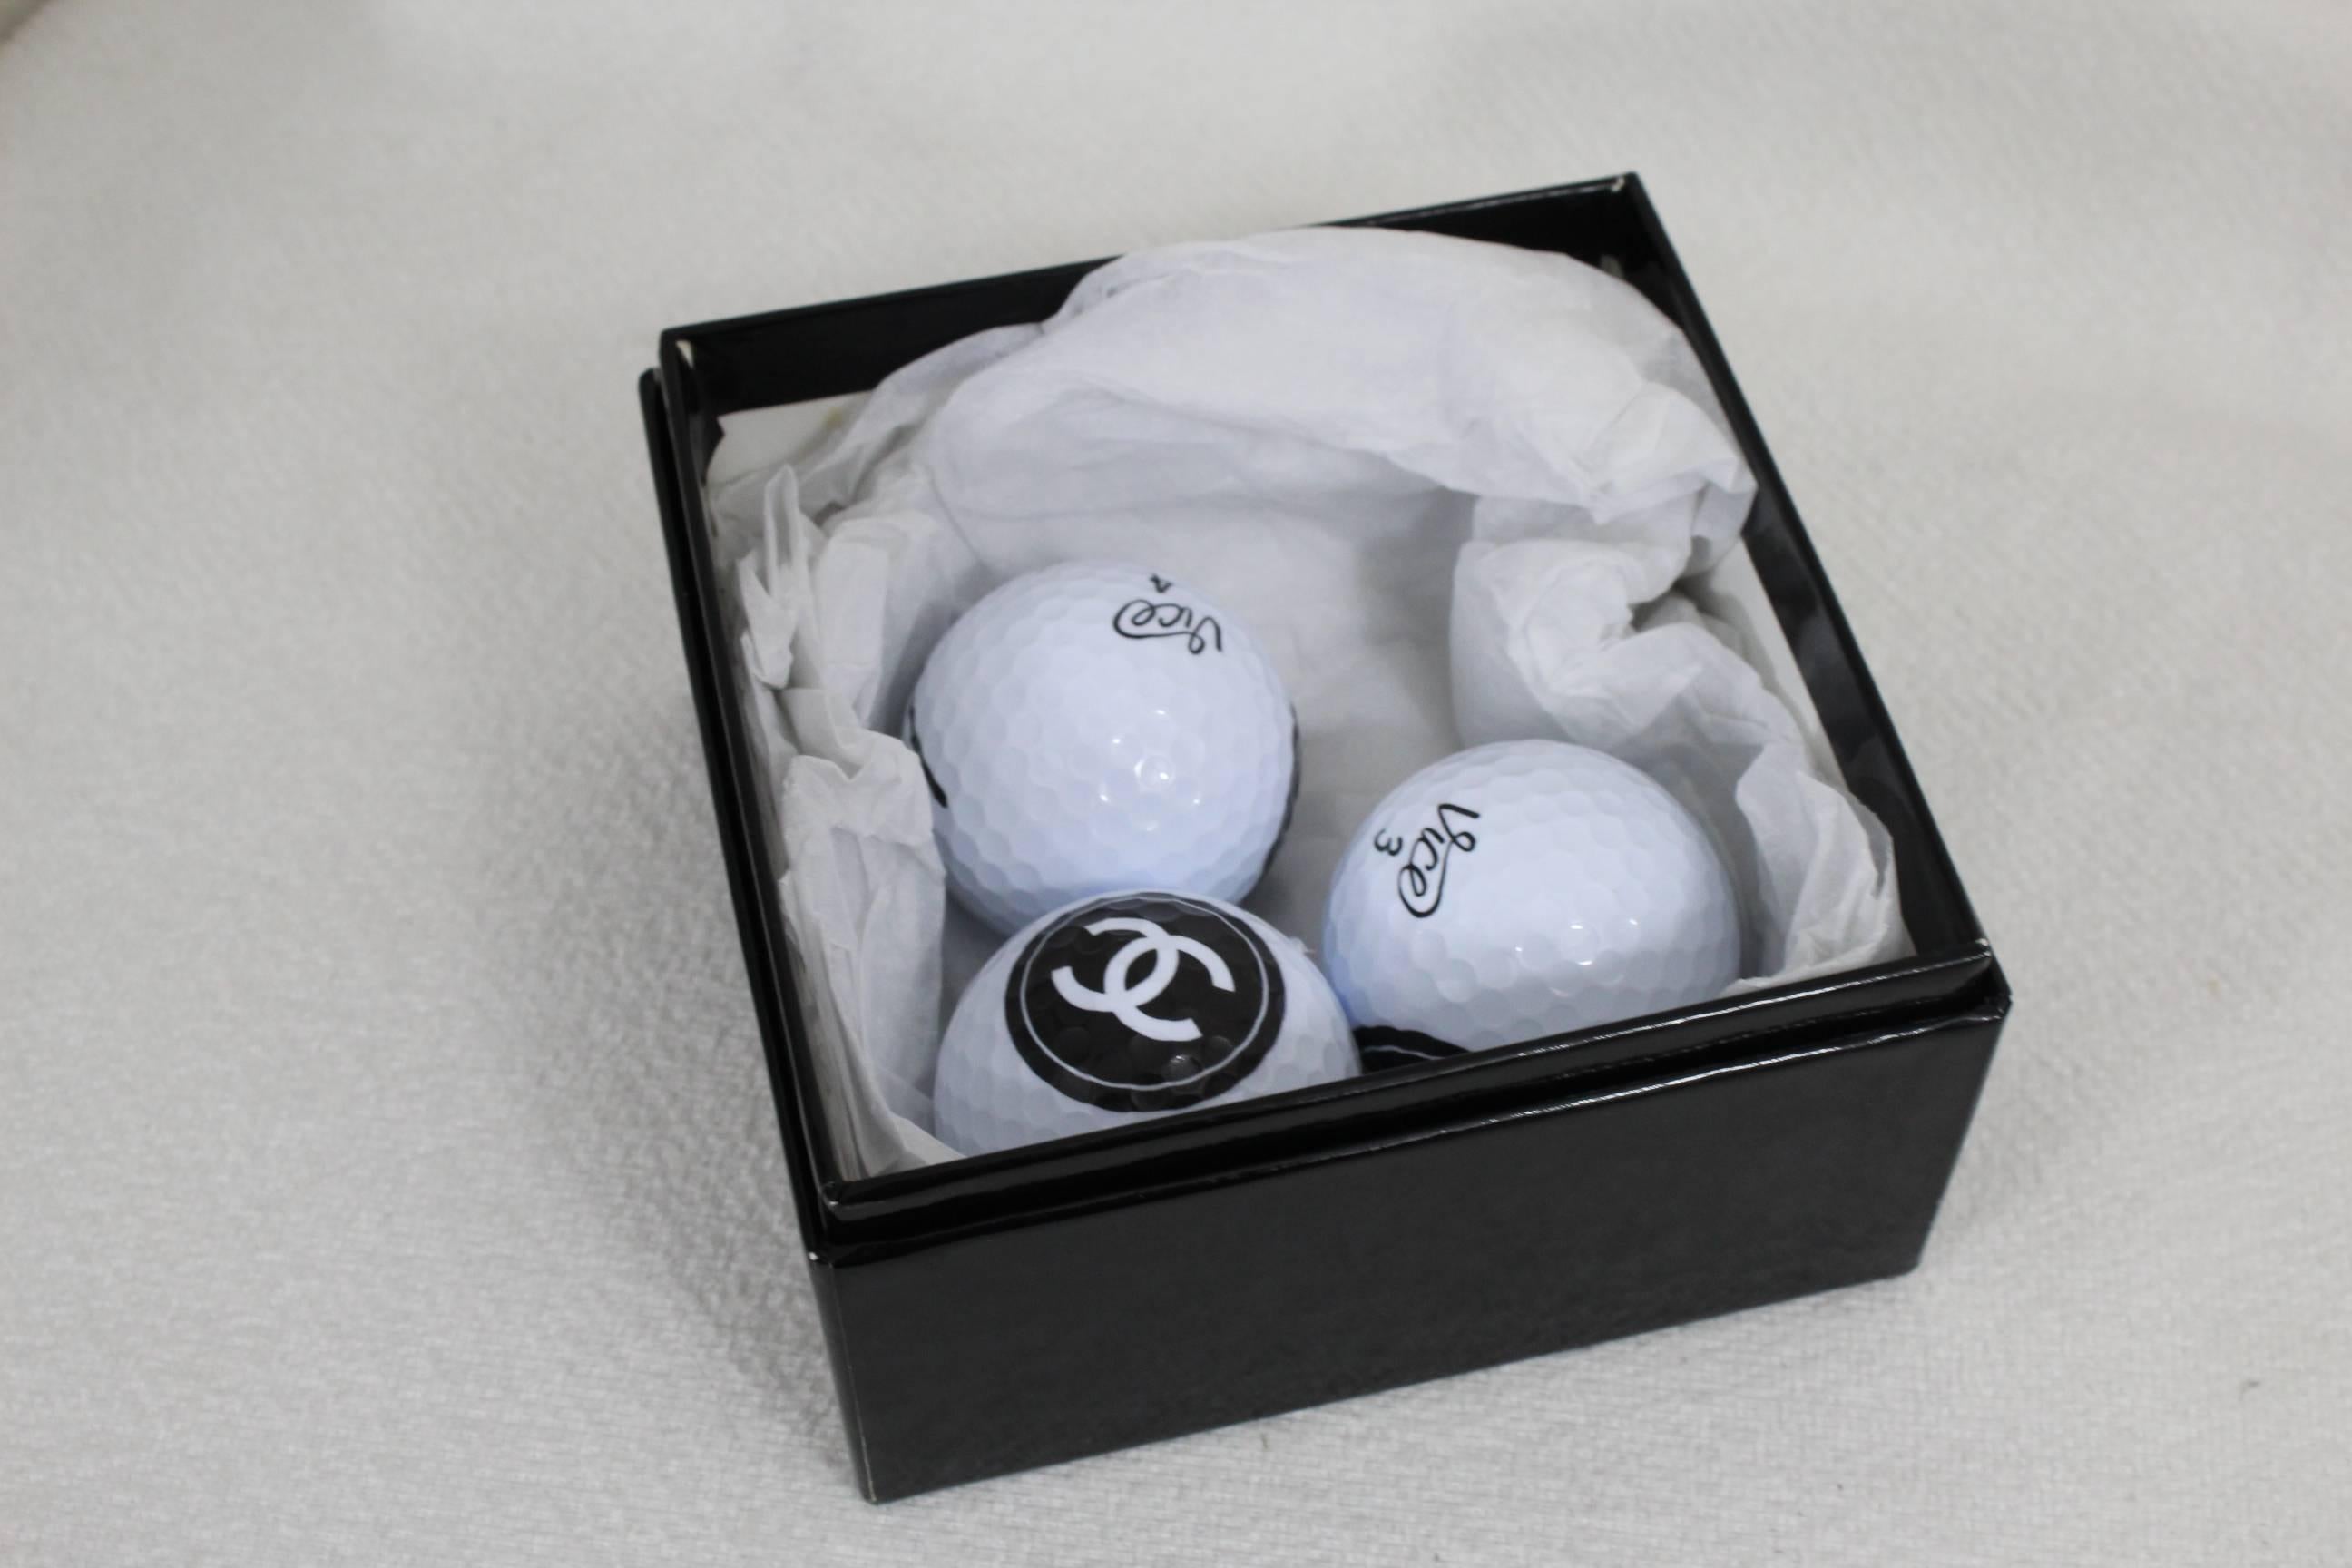 Perfect for a golfer lover or collector 3 Chanel Golf balls in its box.

Excellent condition